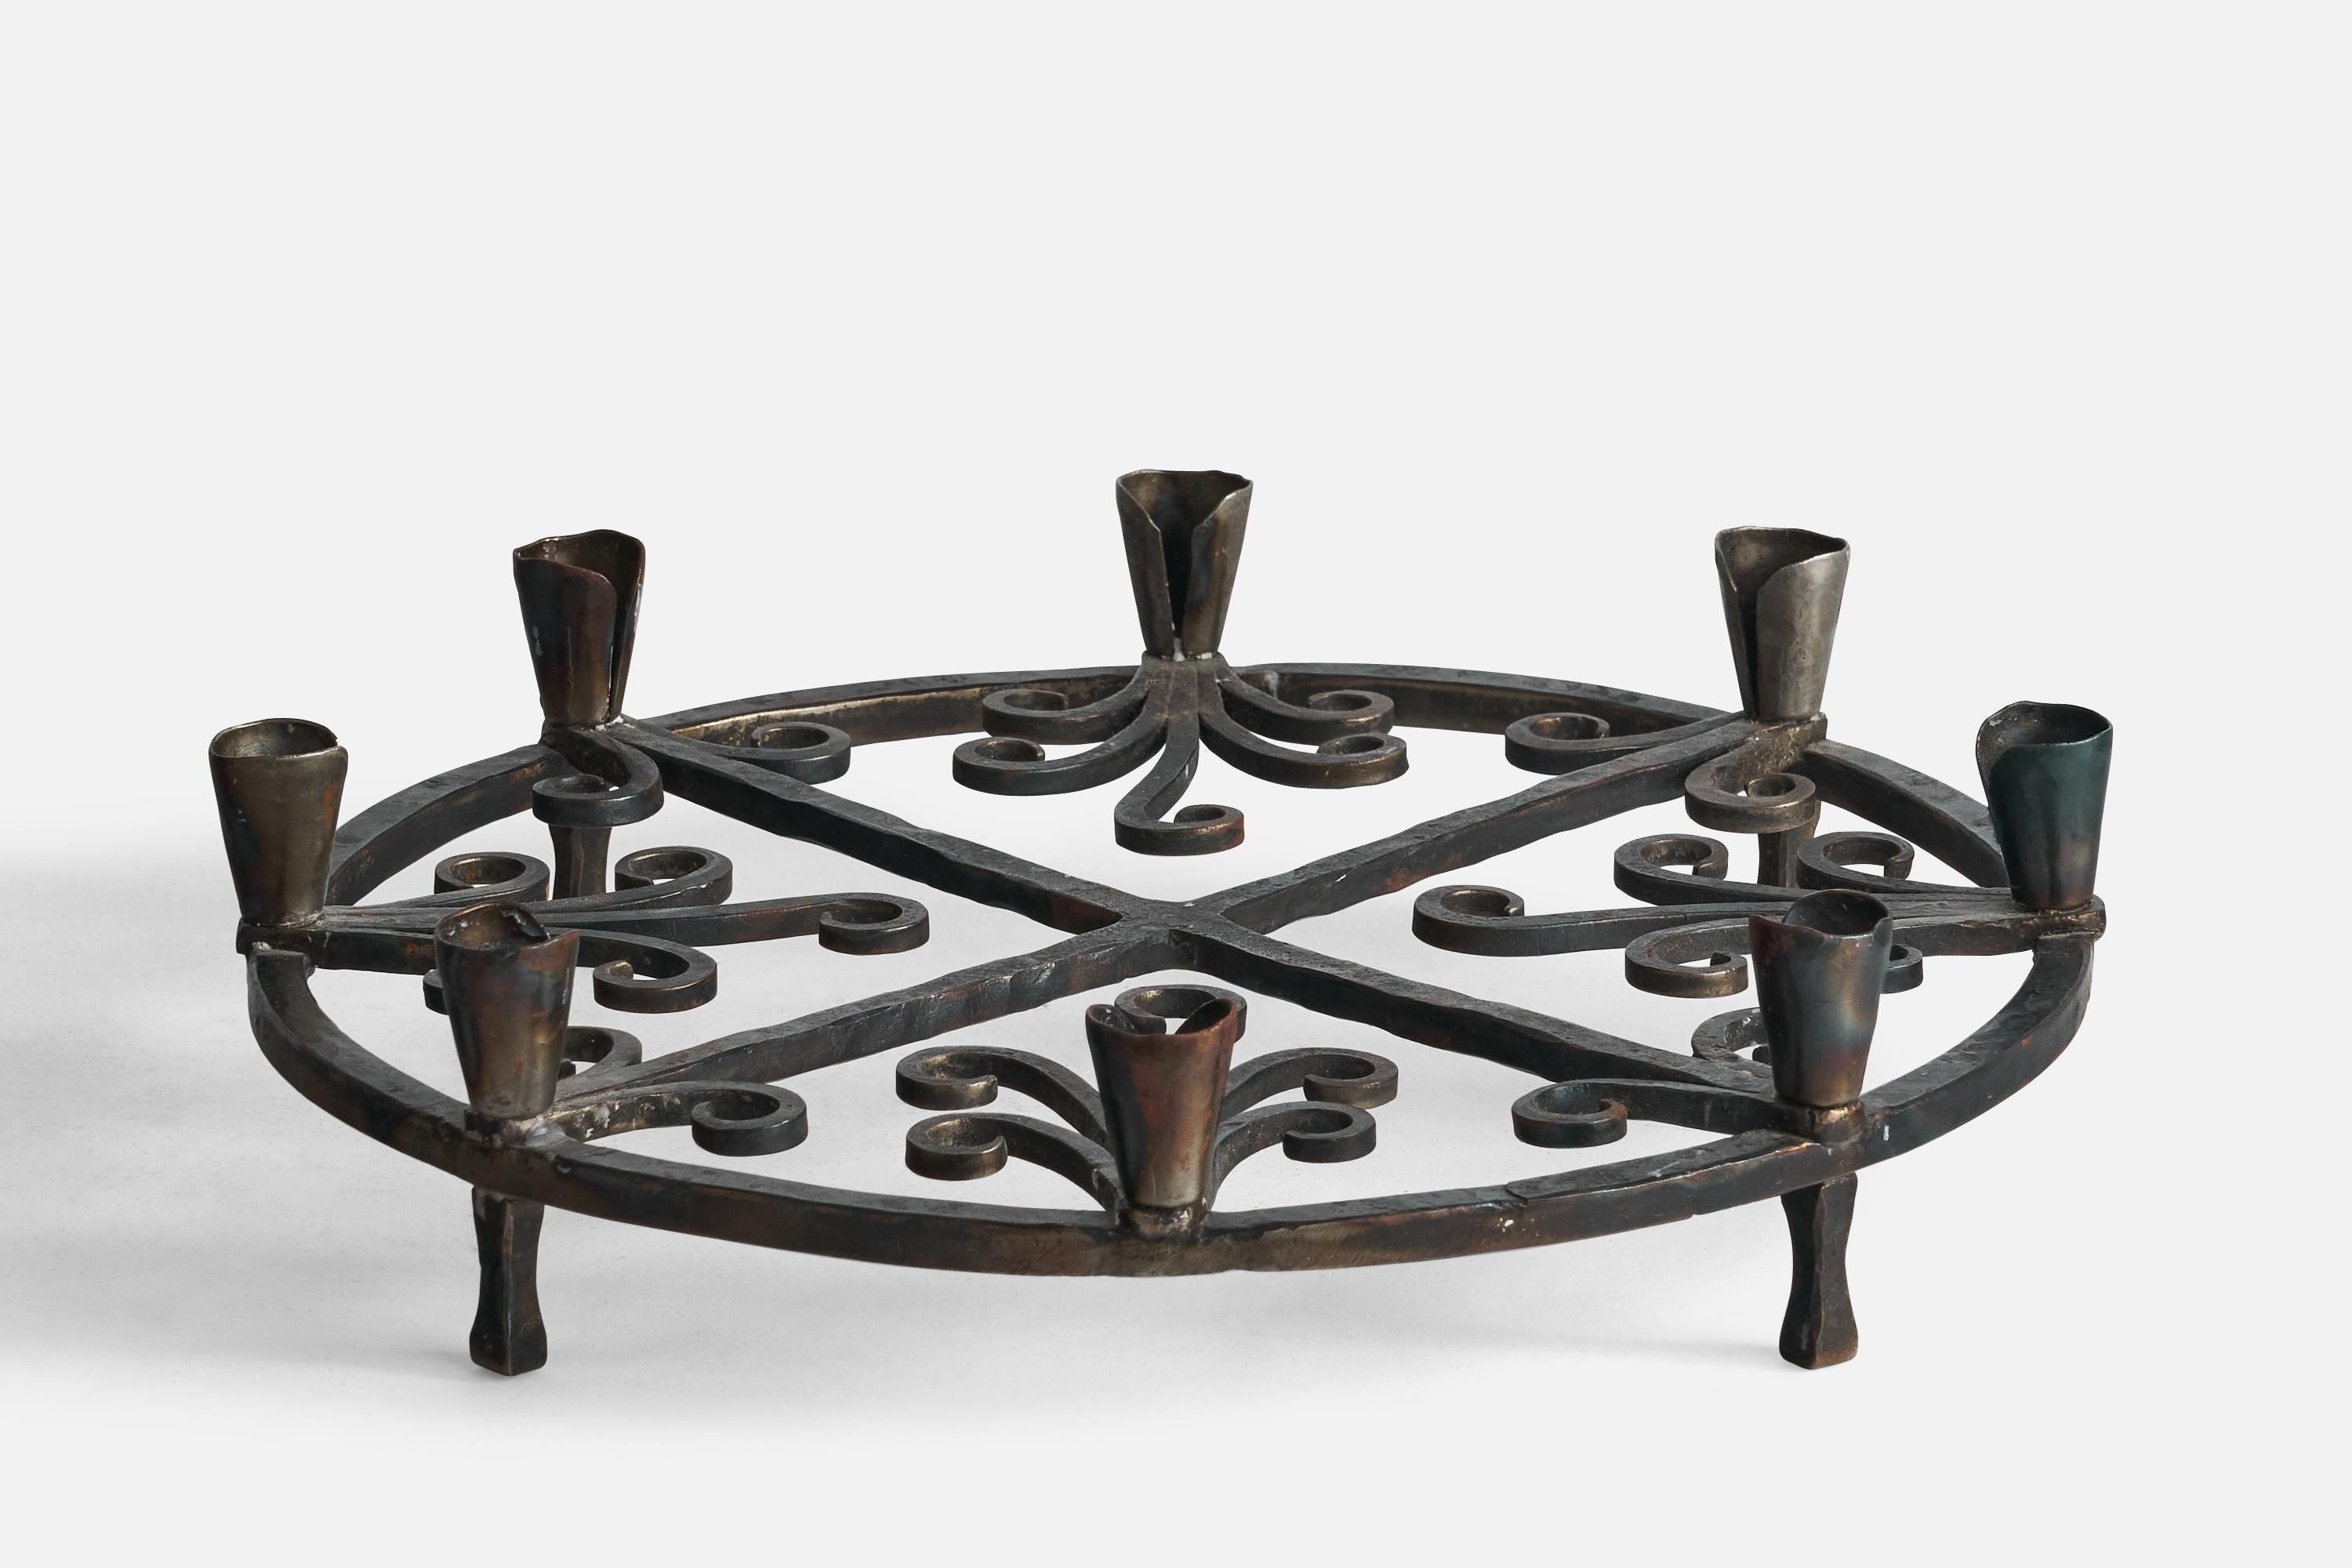 A wrought iron candelabra designed and produced in Sweden, c. 1940s.

Holds eight 0.6” diameter candles